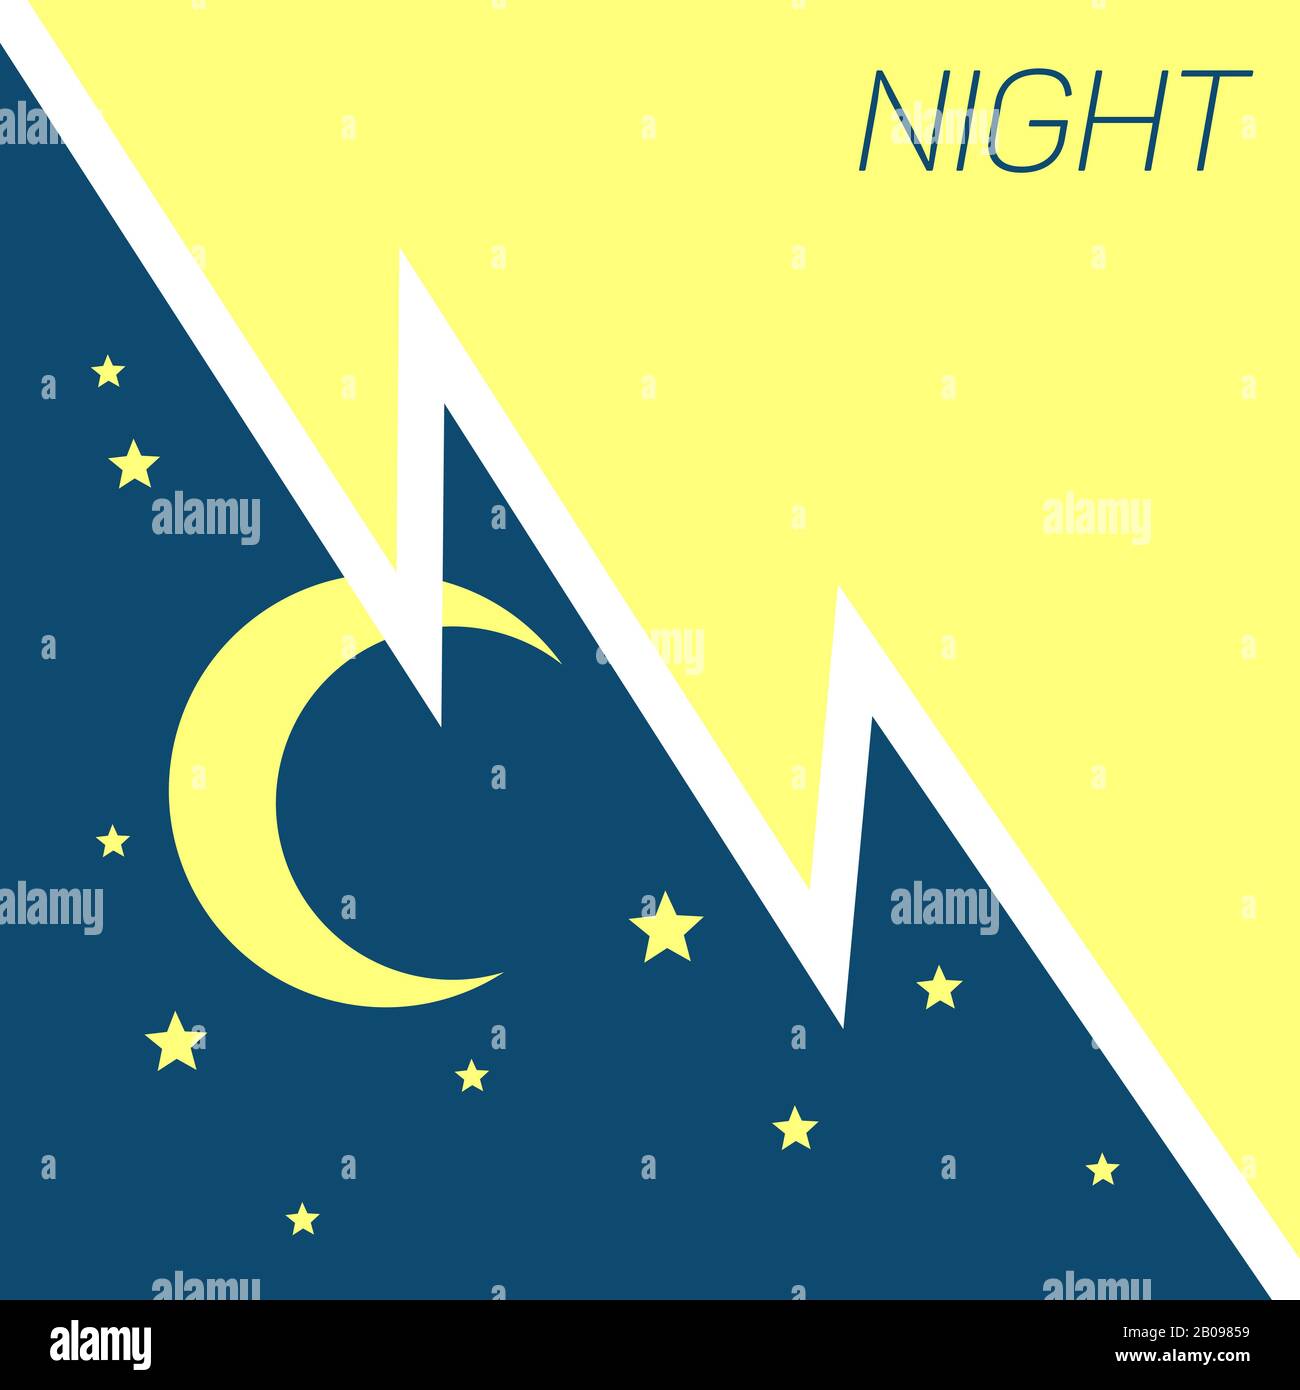 Vector crescent moon and stars night concept. Illustration of dark night with star Stock Vector